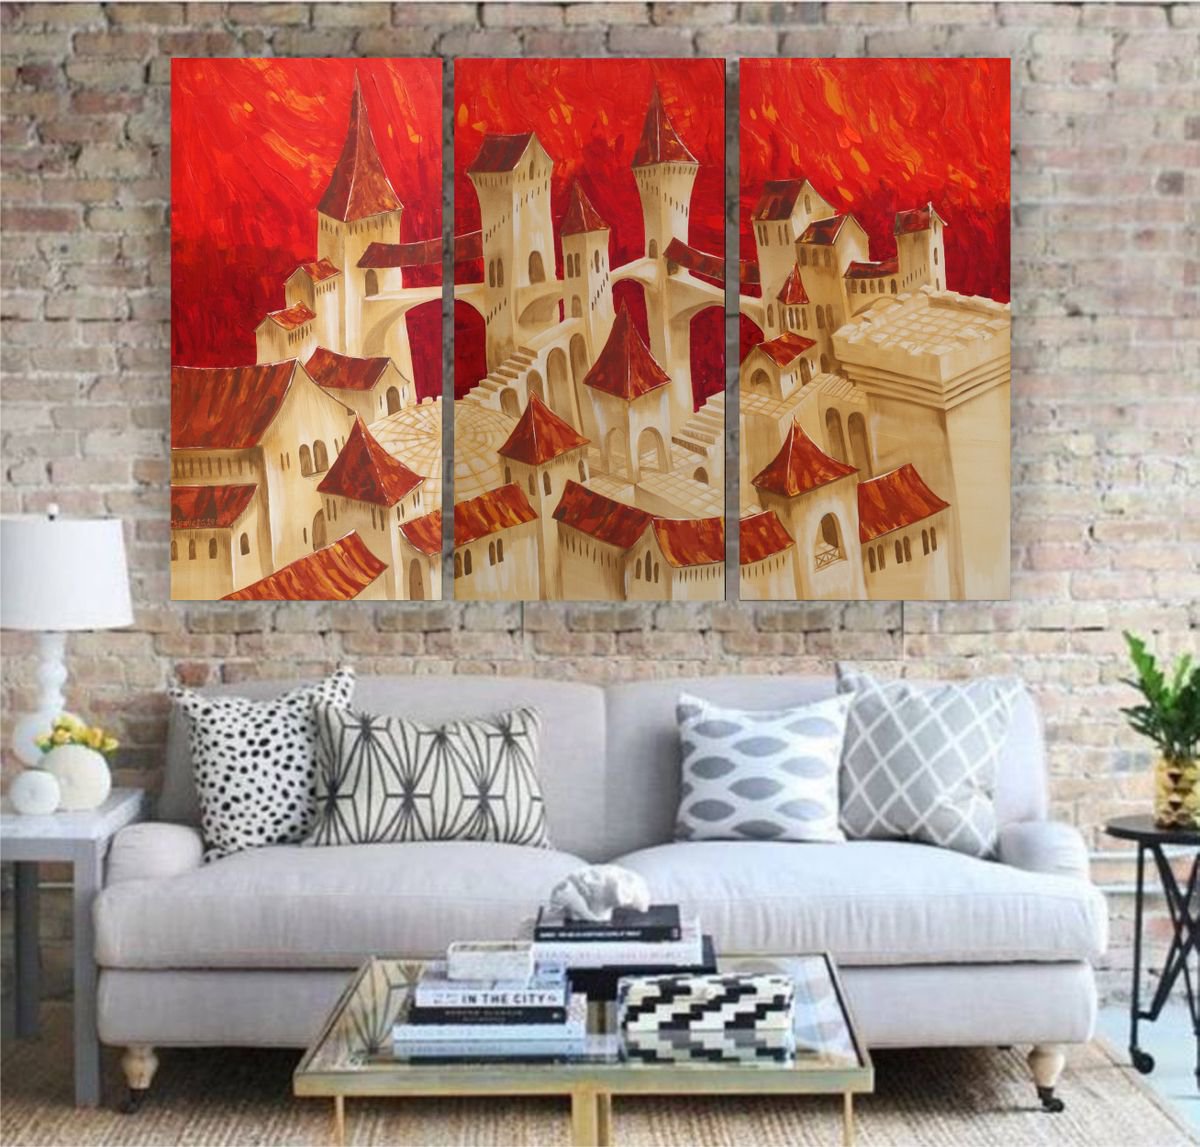 XXL surrealistic old town orange cityscape in Italy palette knife S038 extra Large paintin... by Ksavera